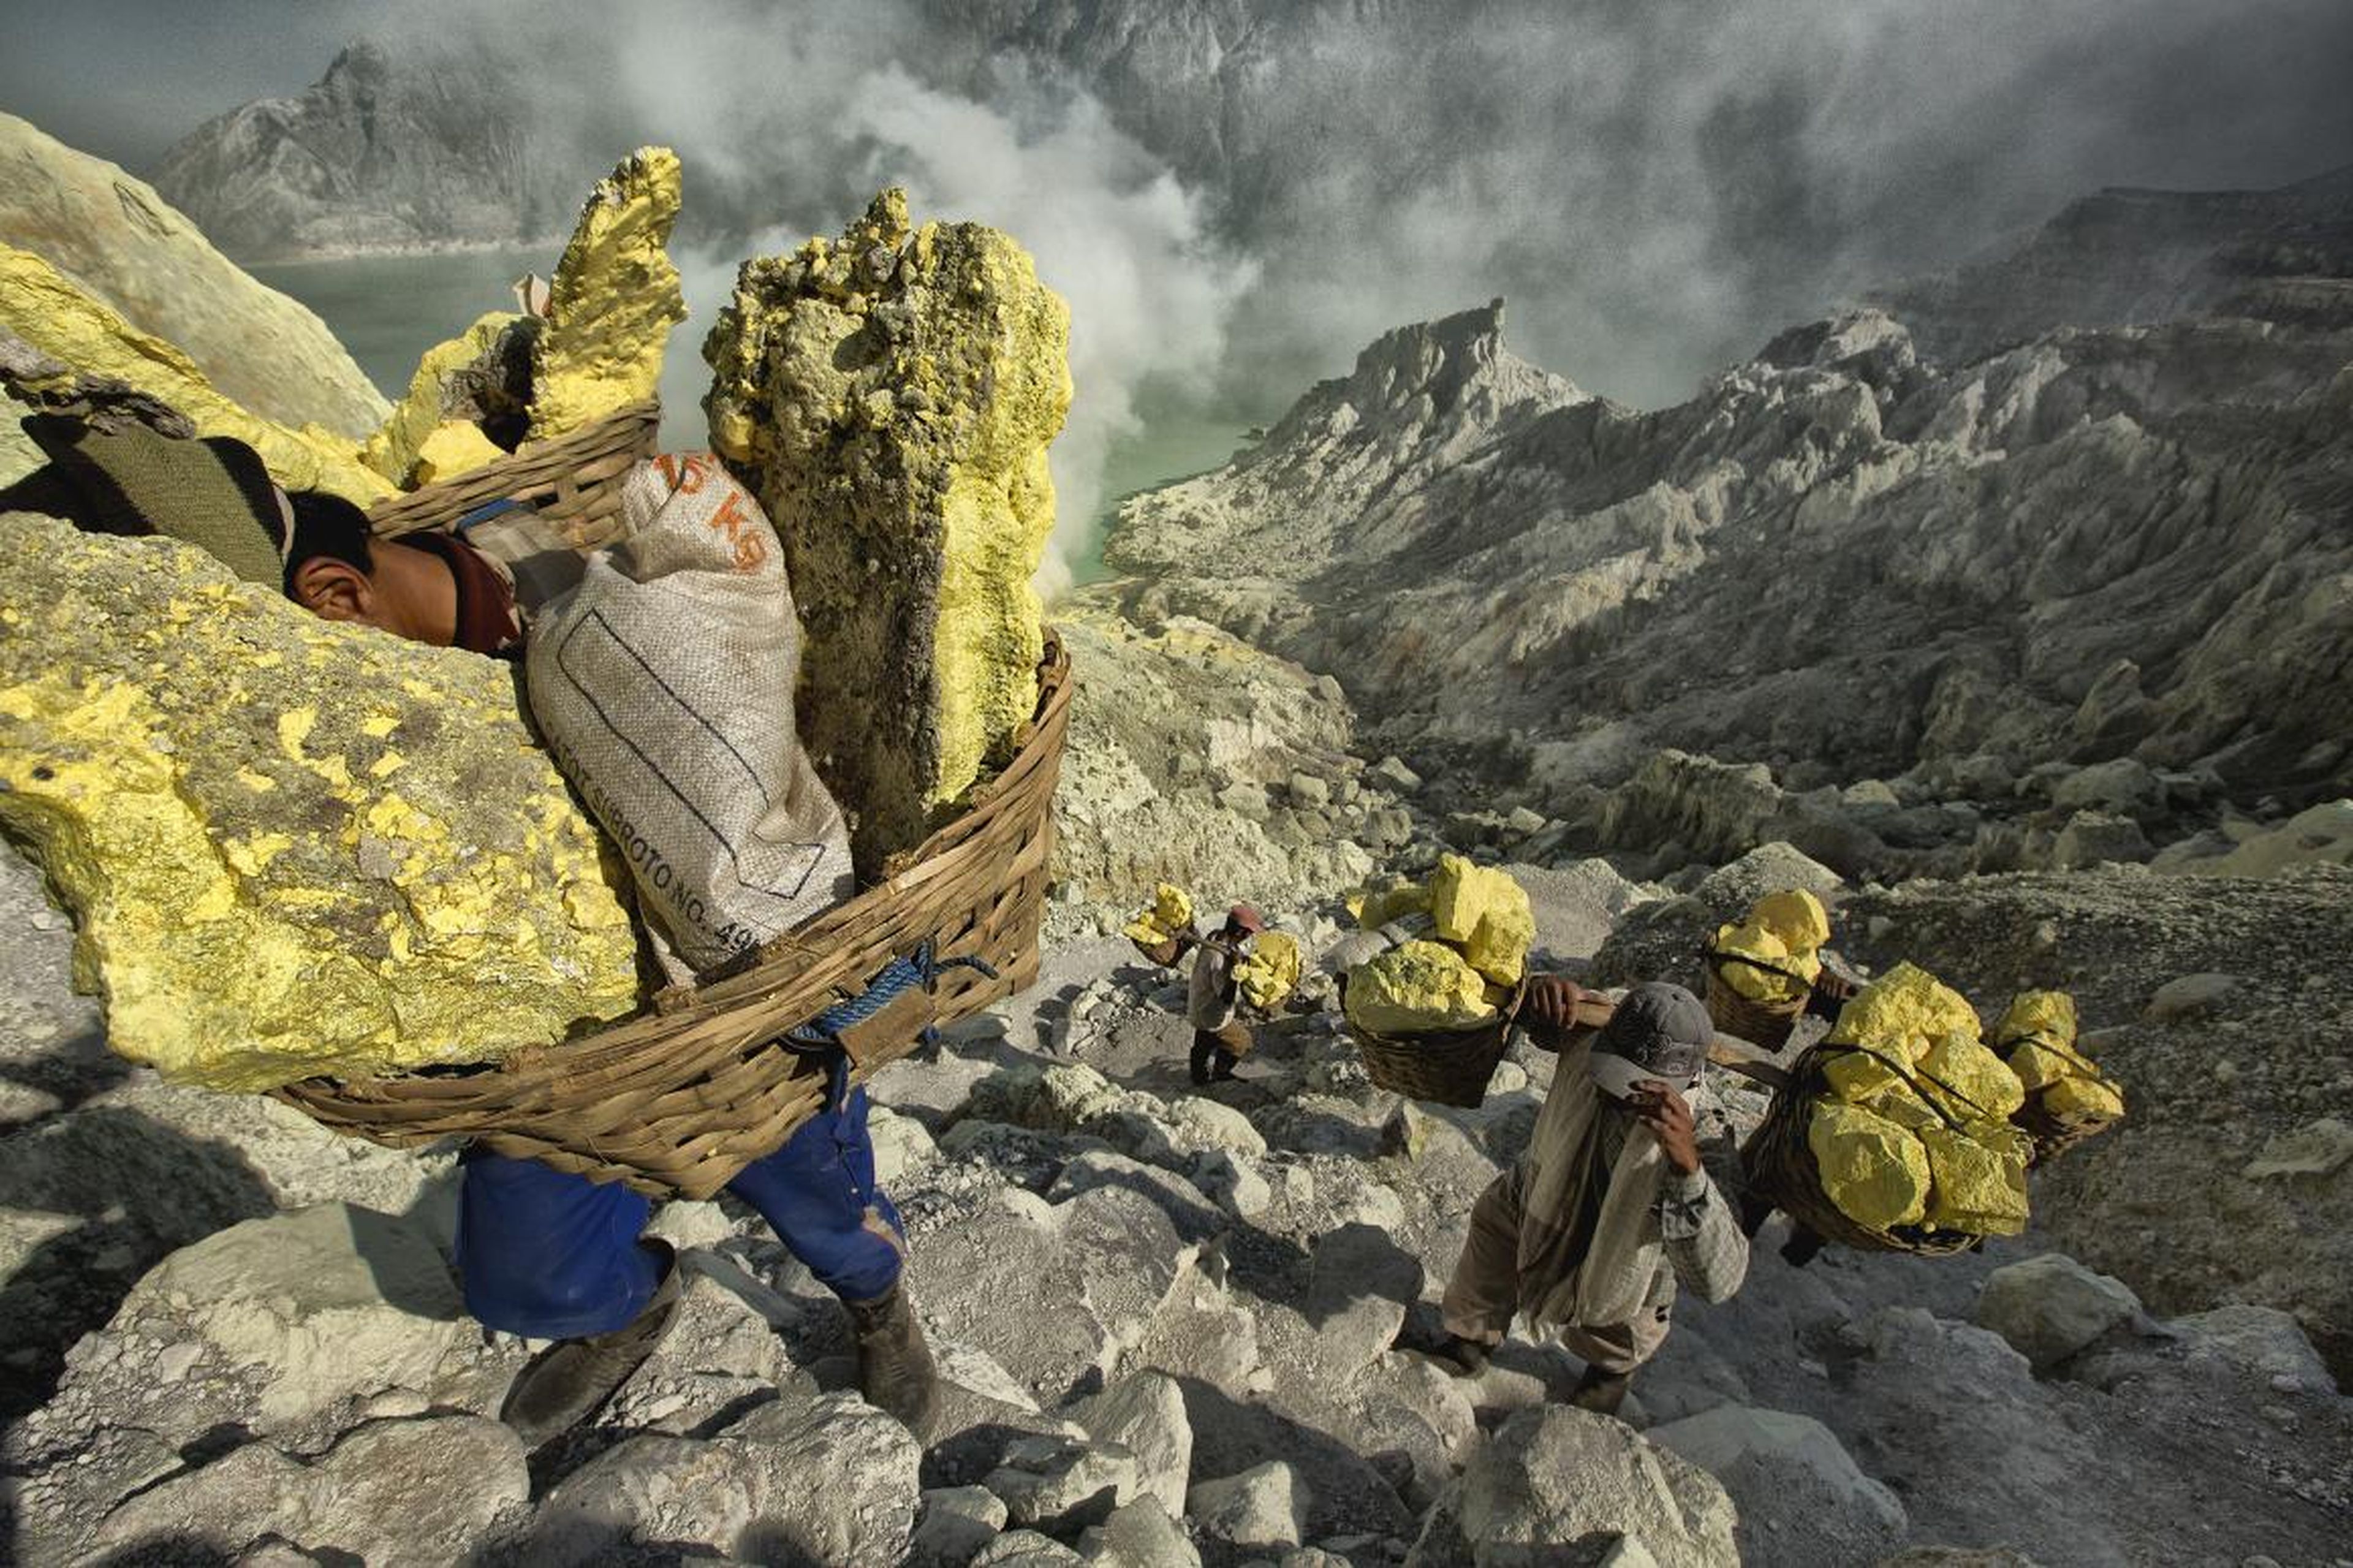 1. Sulfur miners in Indonesia work inside an active volcano, where they carry around 154-pound loads a half mile out of the volcano, and then two more miles down the mountain to a weigh station.